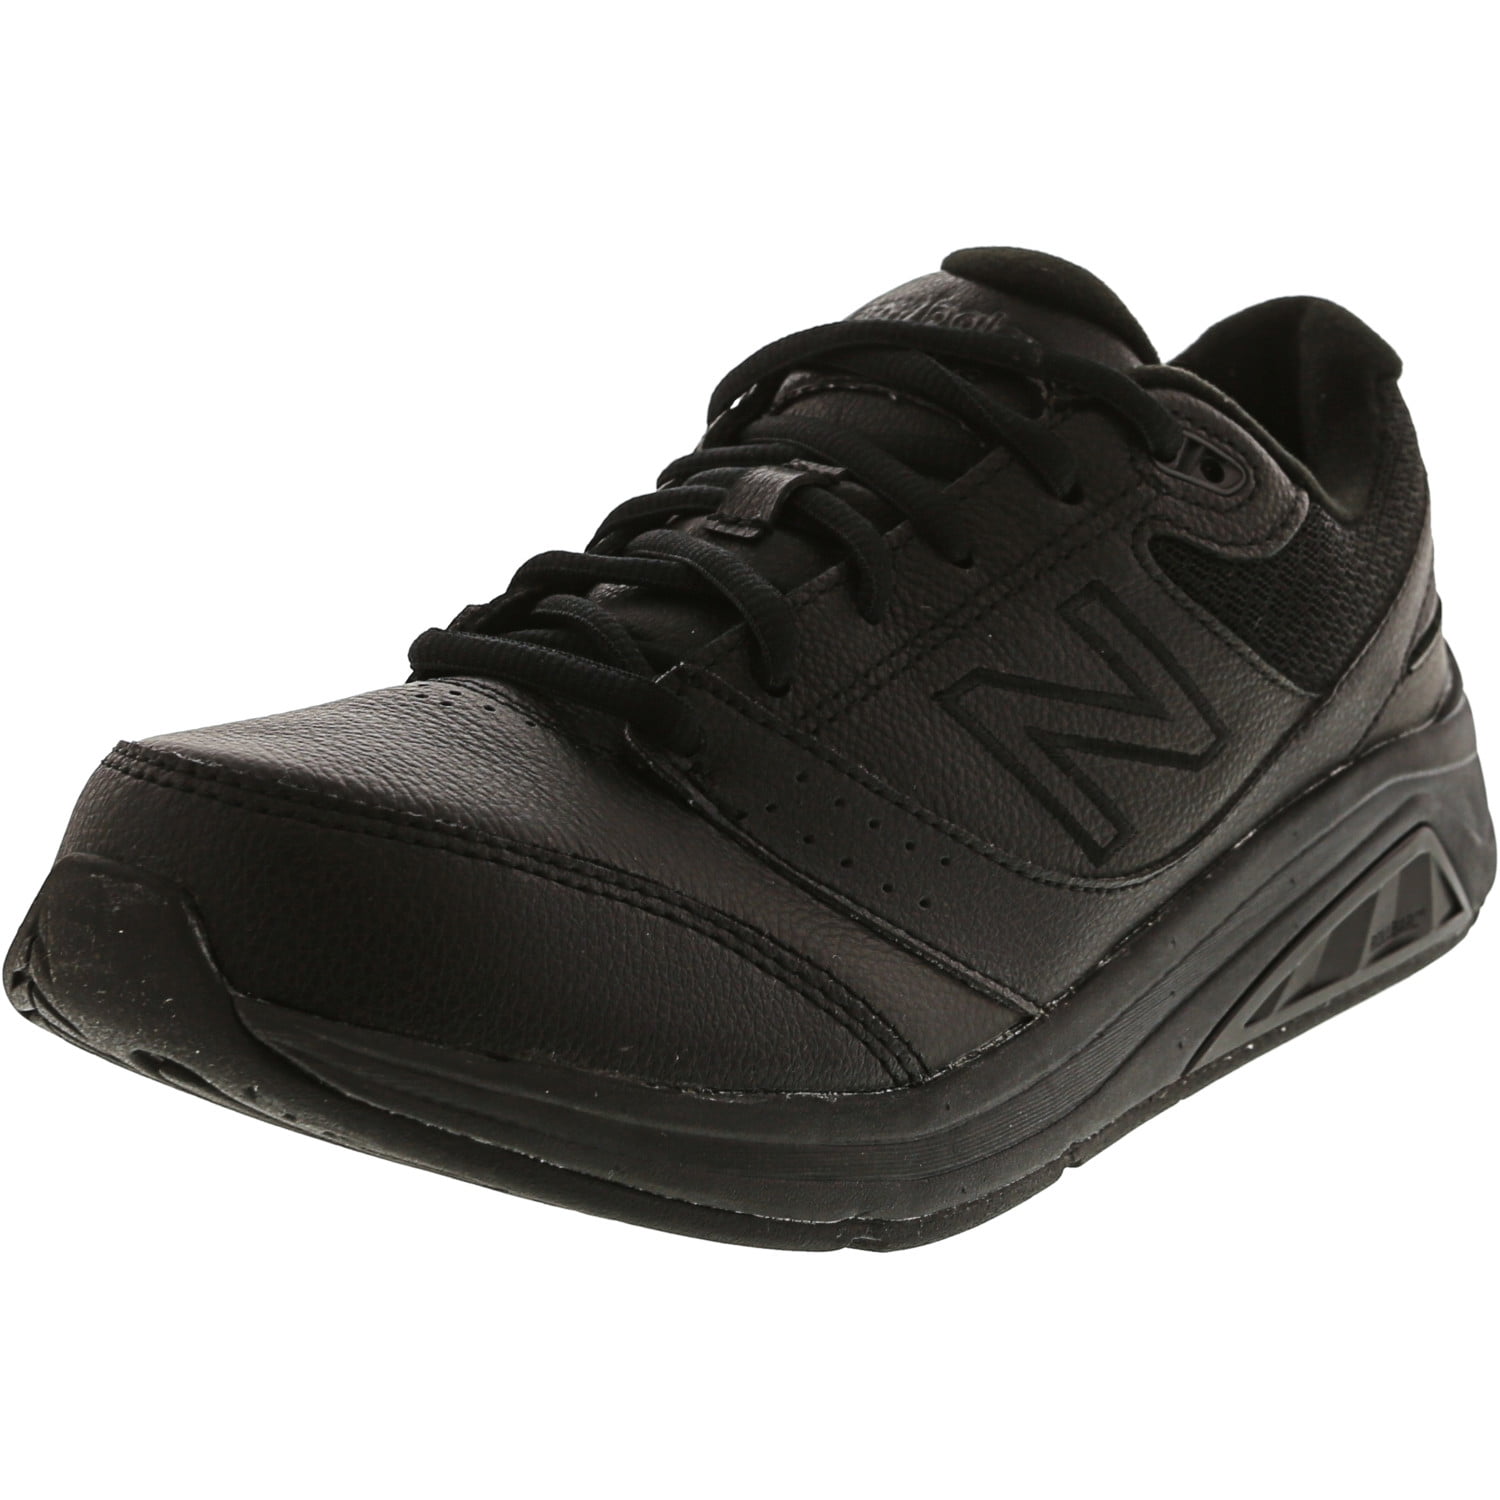 new balance all leather